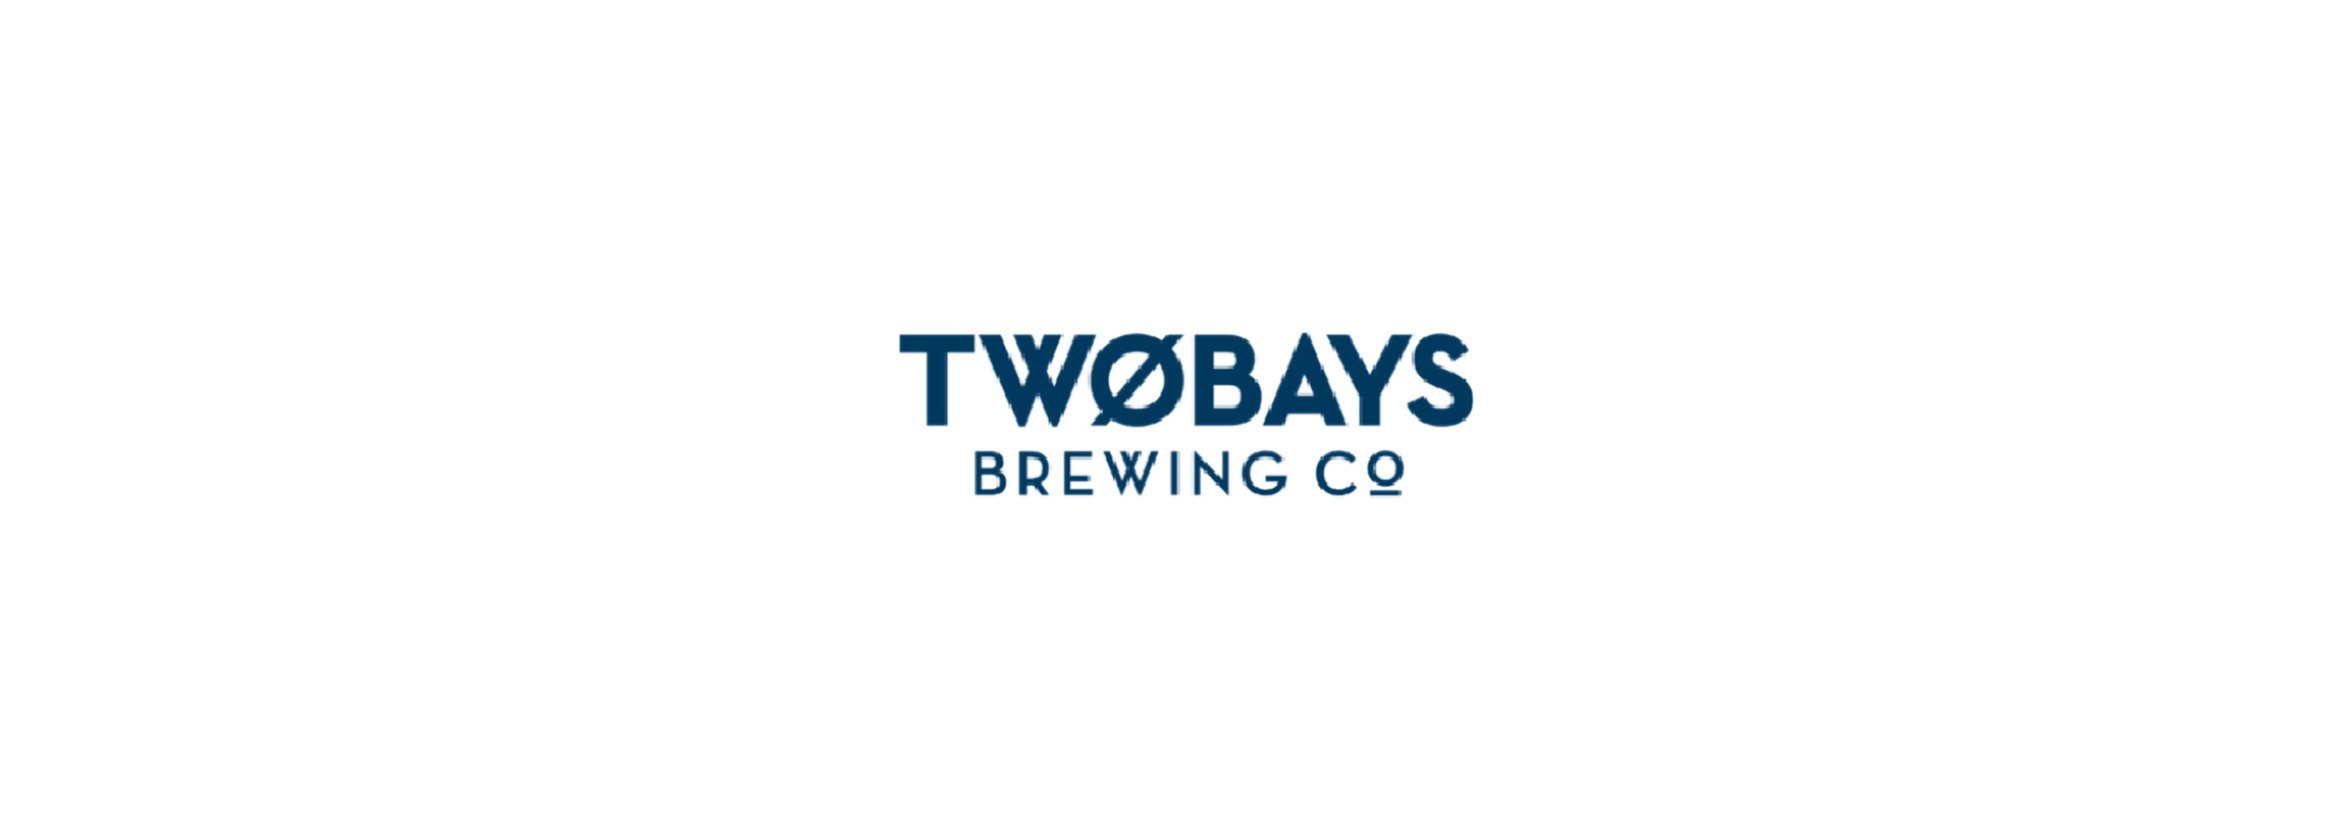 The Two Bays Brewing Co logo